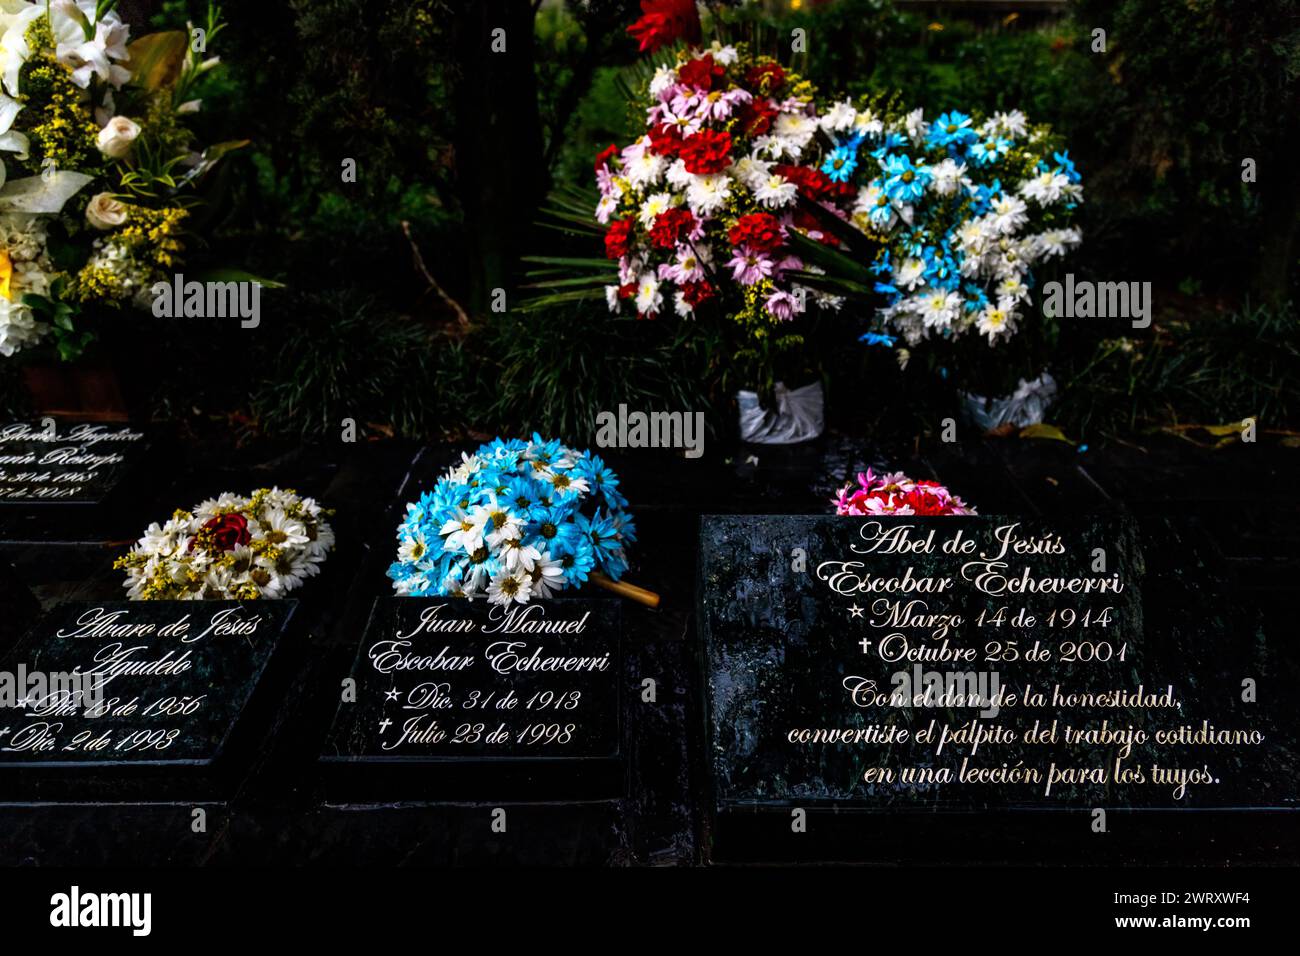 Medellin, Colombia - January 11, 2023: Tombs of Pablo Escobar Gaviria's family with floral offerings Stock Photo